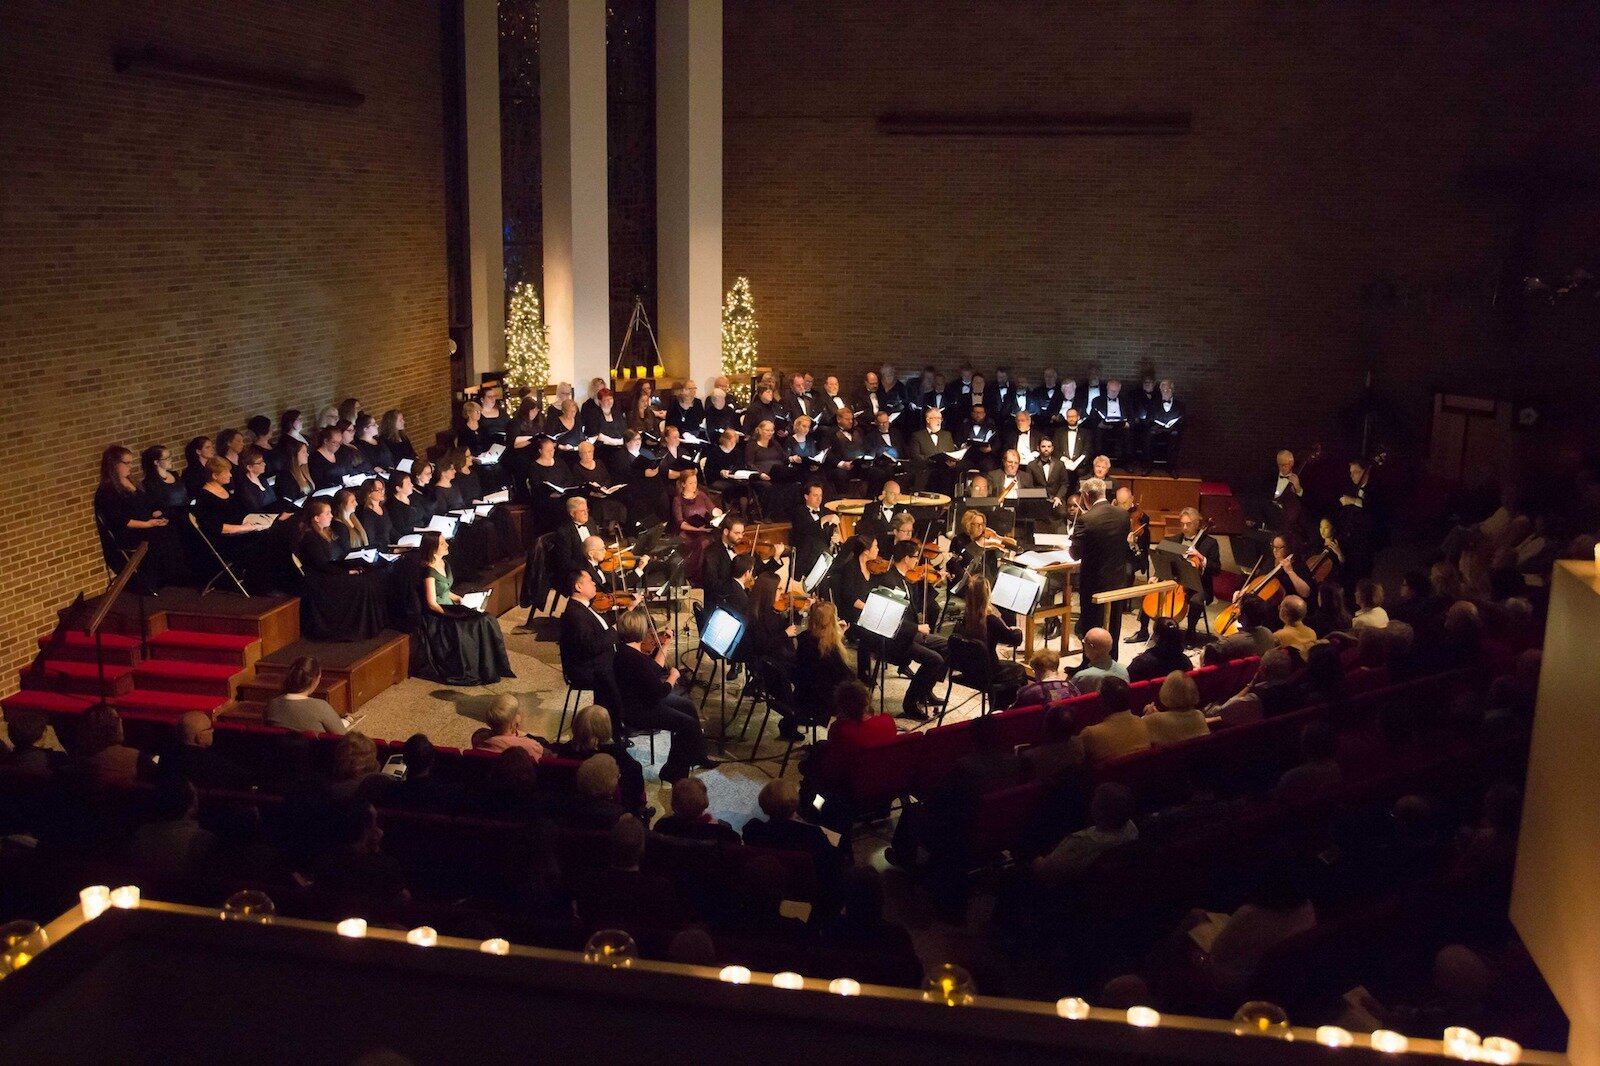 The Fort Wayne Philharmonic gives concert-goers the opportunity to enjoy the holiday spirit at many themed events each winter.